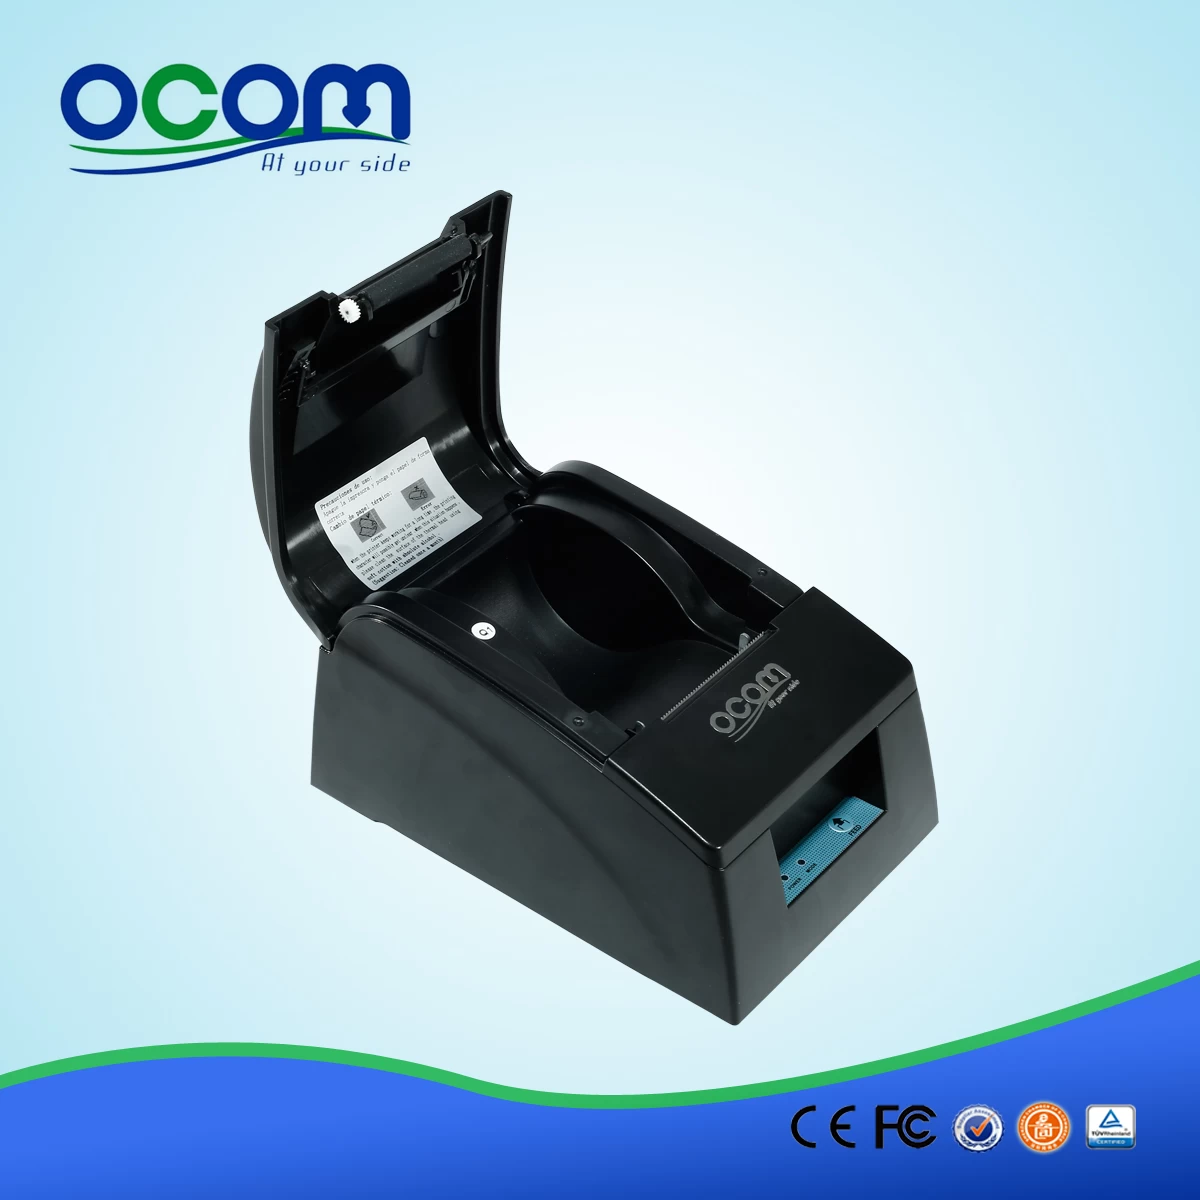 58mm Android Thermal Portable Receipt Printer